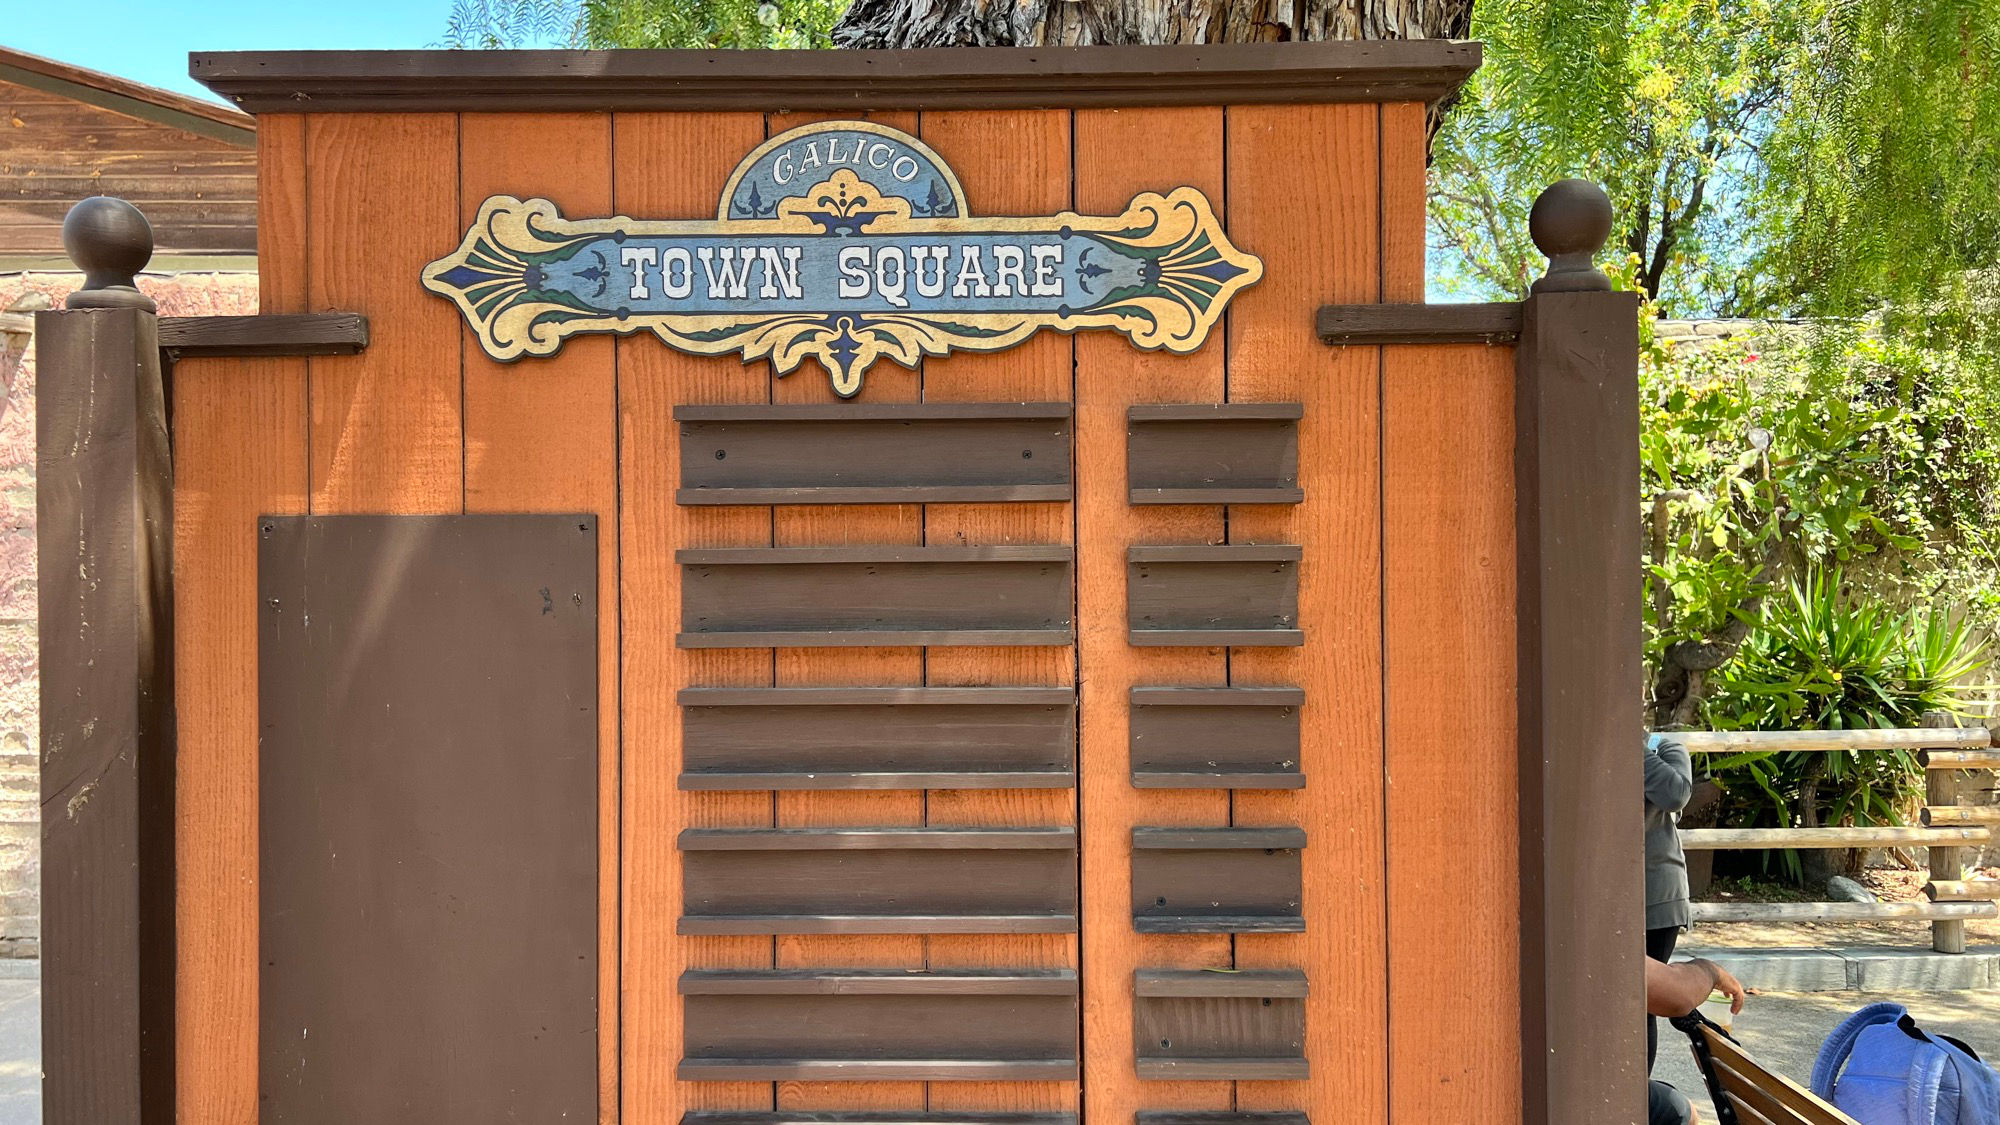 Calico Town Square Showtimes